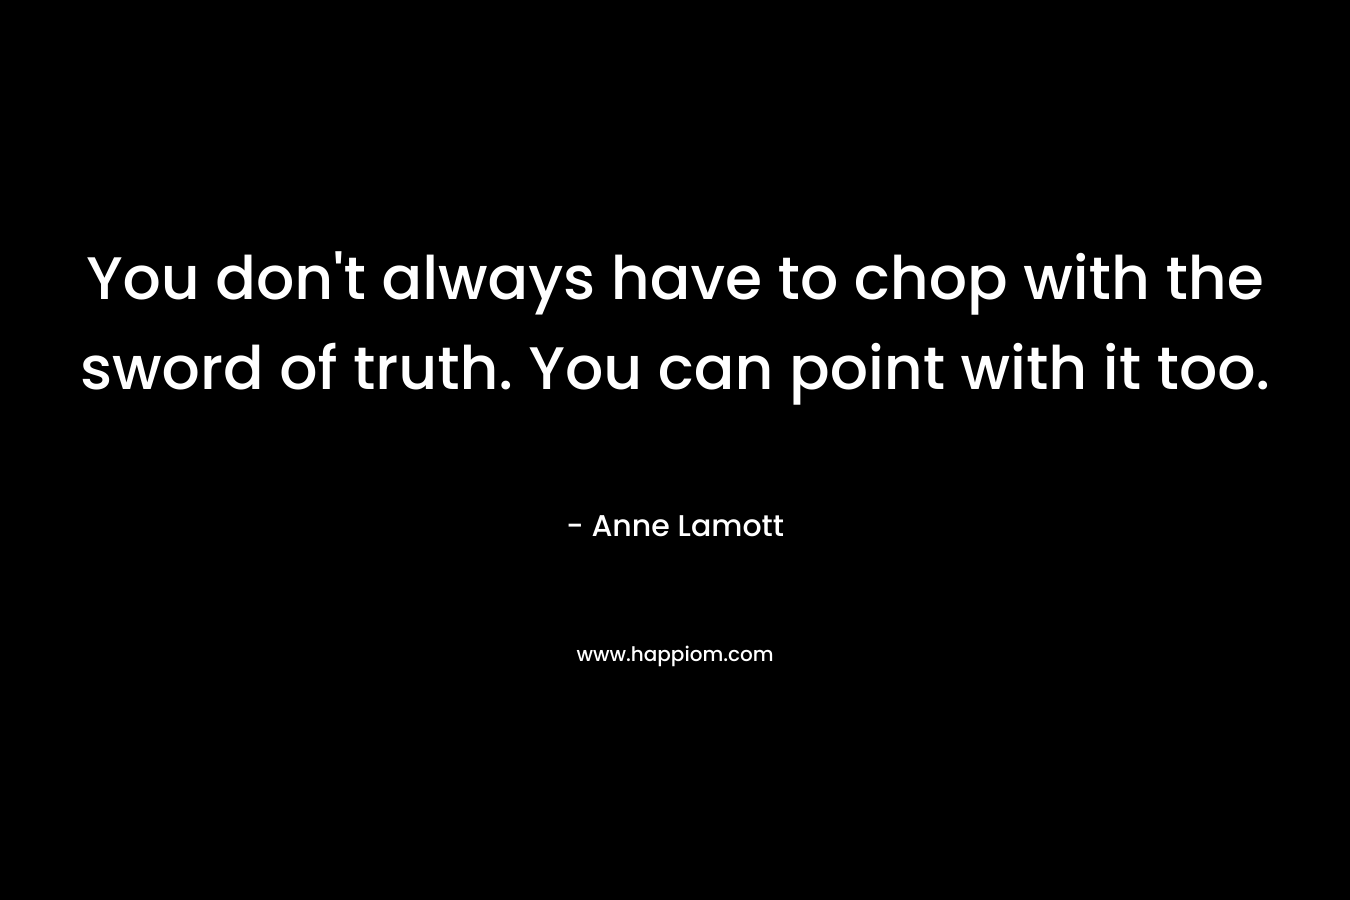 You don’t always have to chop with the sword of truth. You can point with it too. – Anne Lamott